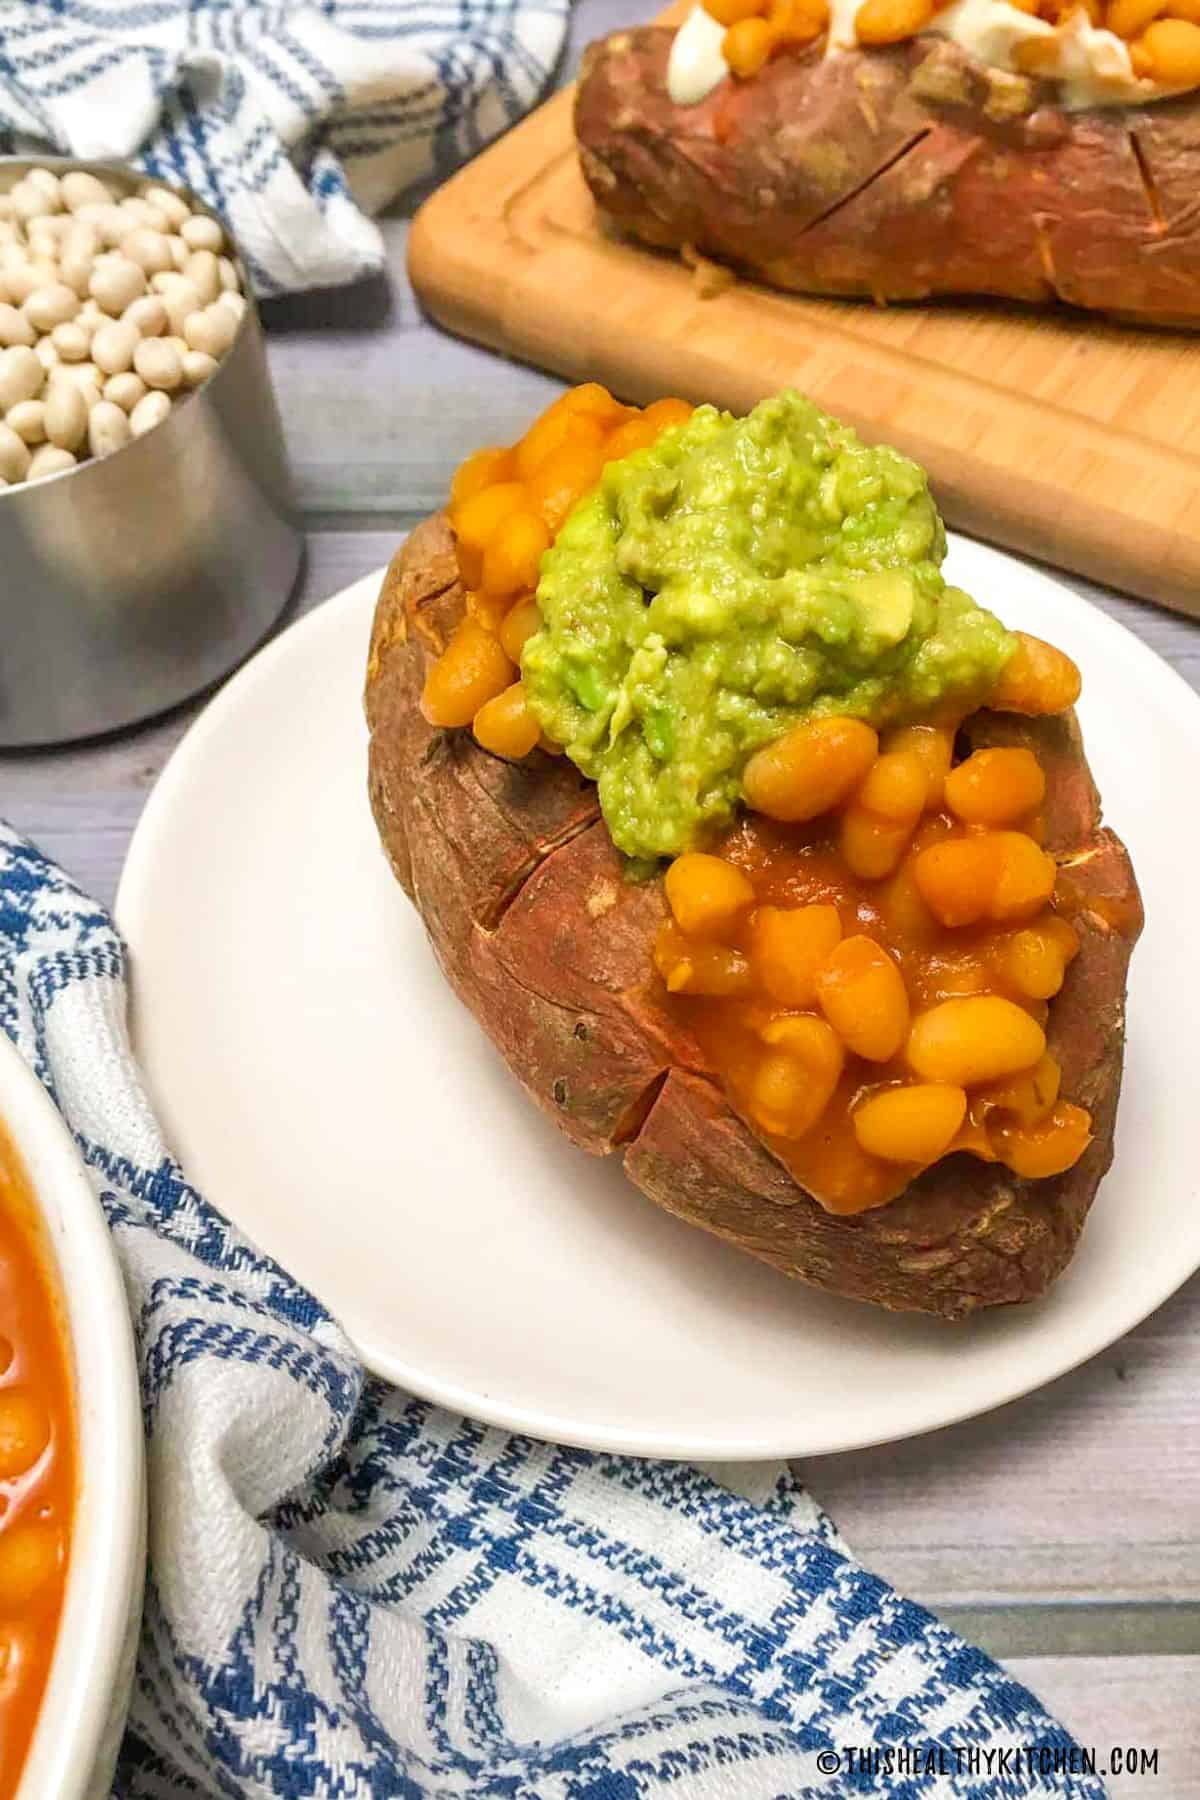 Loaded sweet potato with baked beans and guacamole.